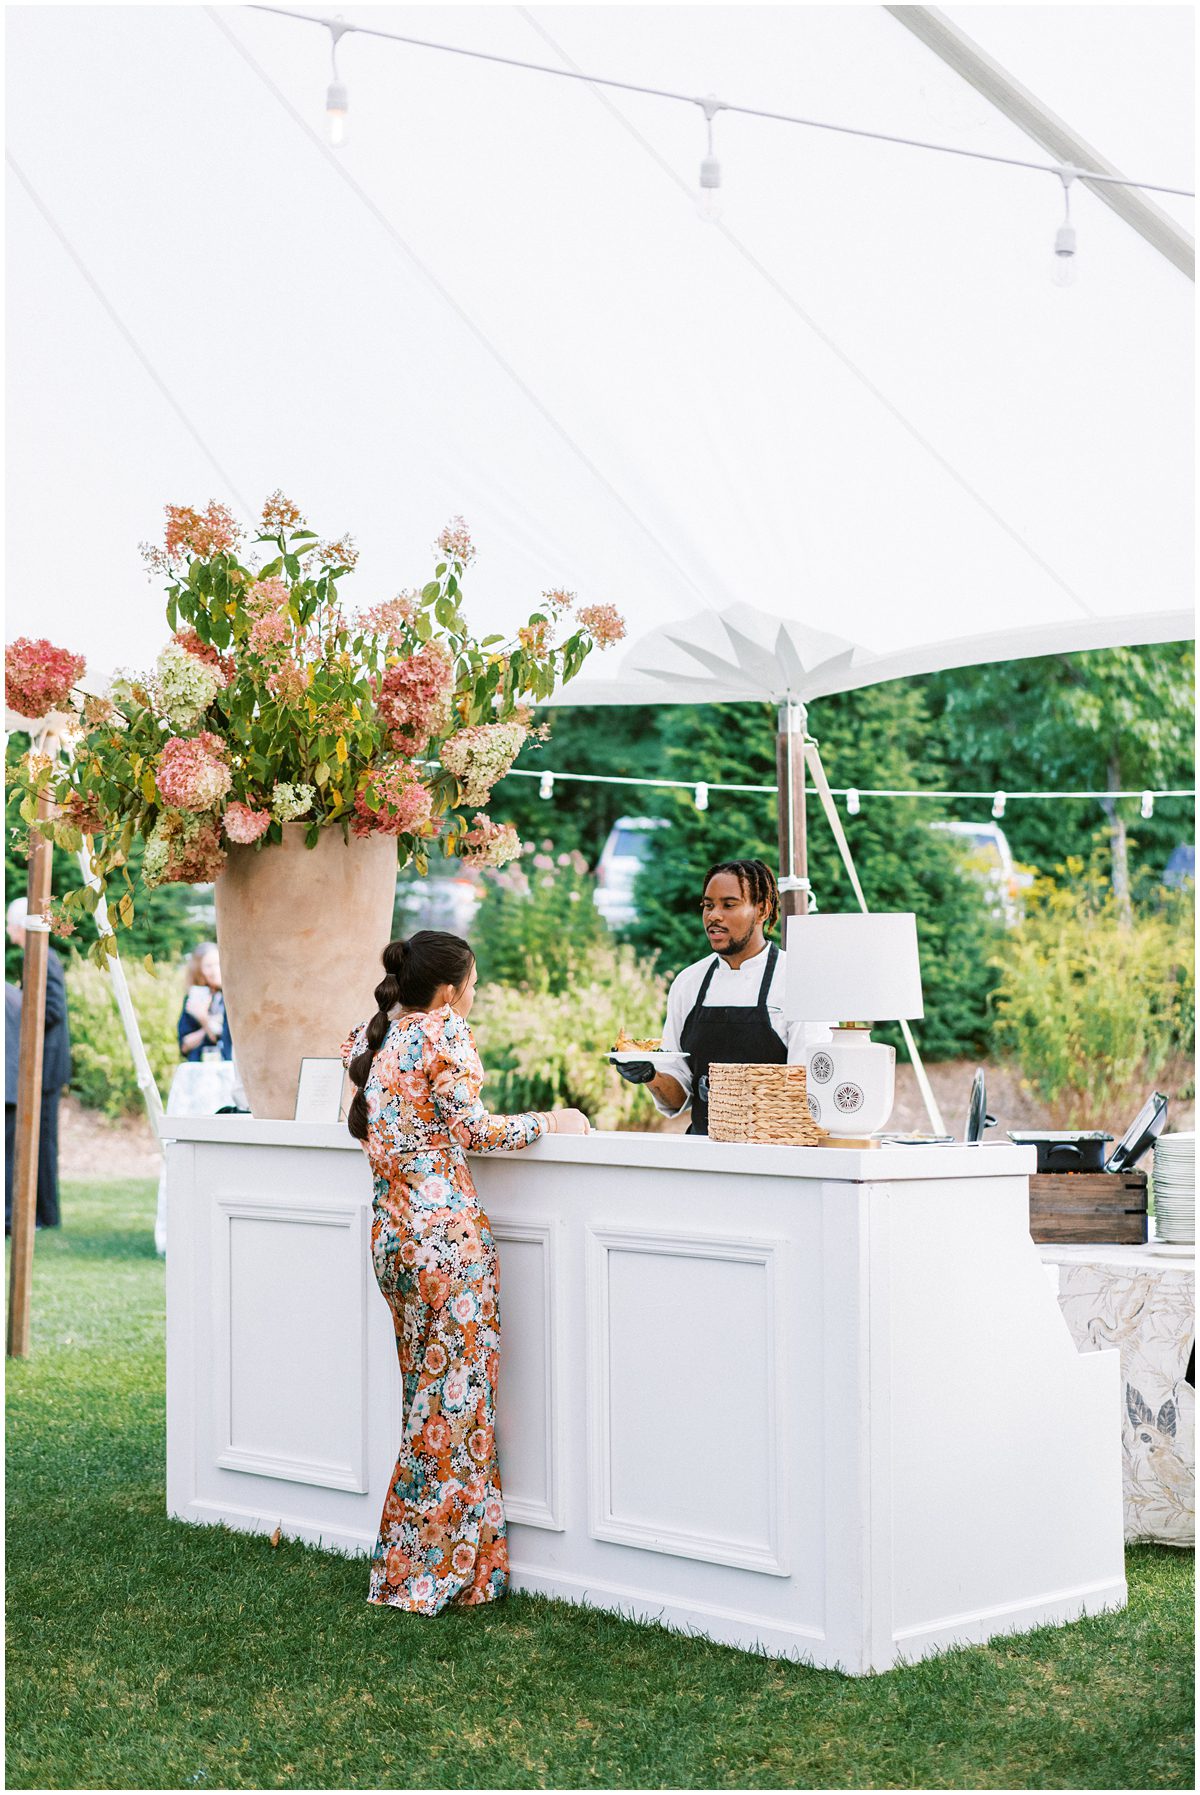 Candid wedding image of a well dressed guest in a colorful floor length floral dress ordering a drink at a white bar at a tented wedding reception in Highlands NC at the exclusive Mountaintop Golf and Lake Club